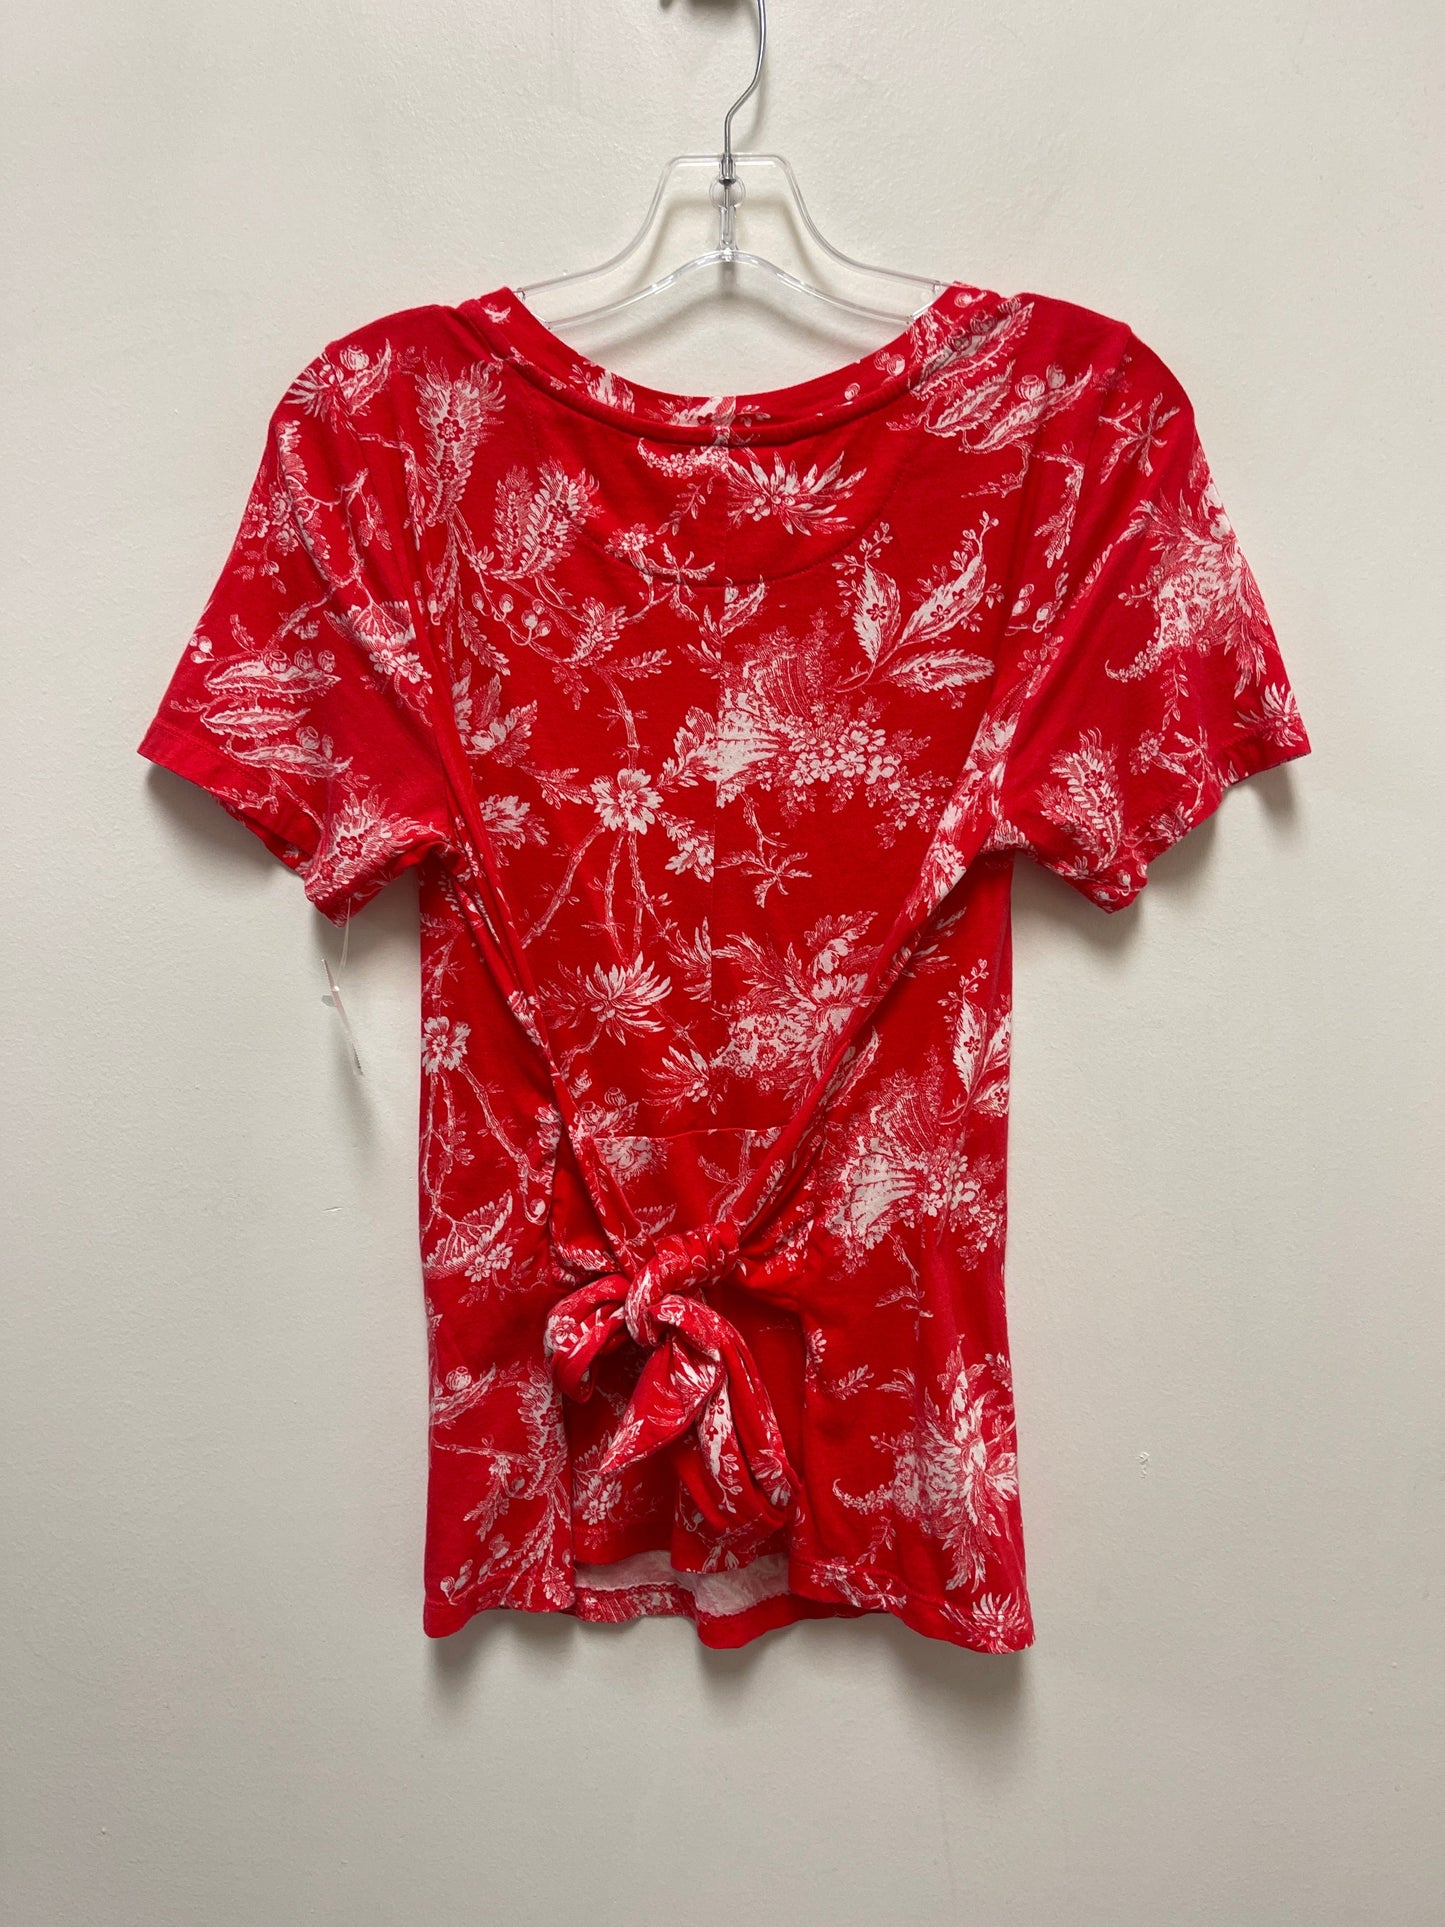 Red Top Short Sleeve Maeve, Size M